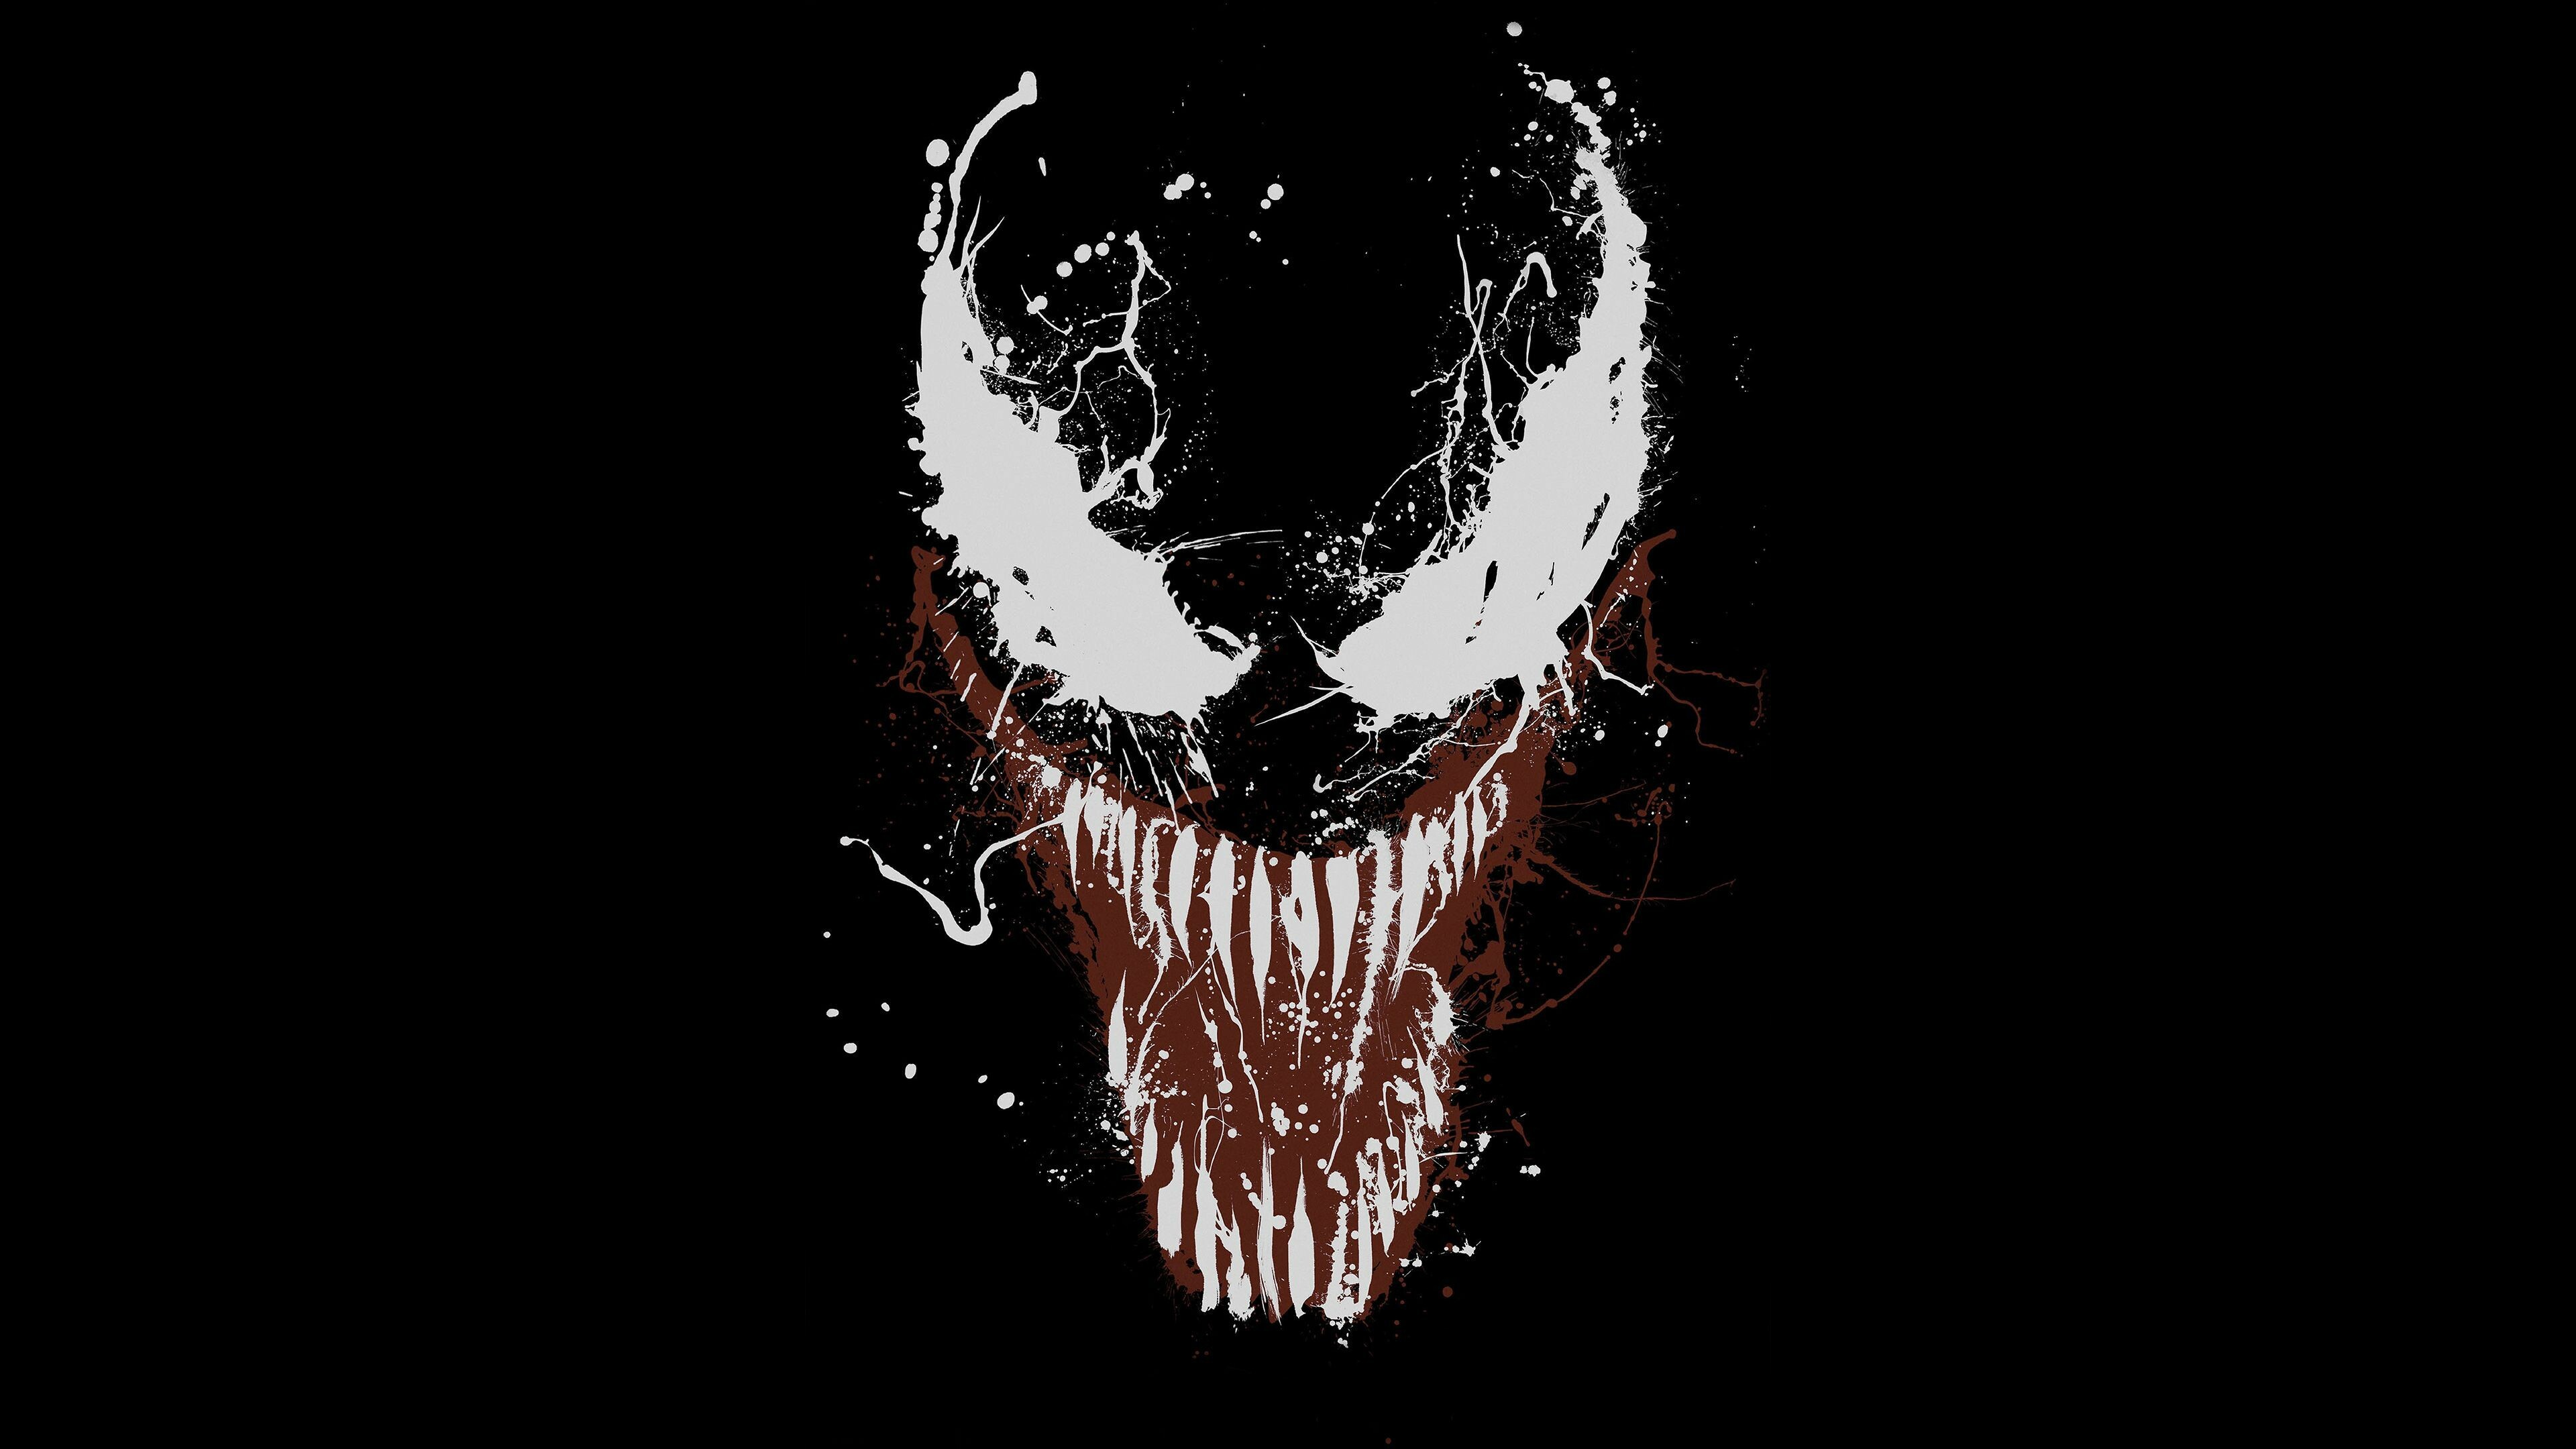 Venom: A 2018 American superhero film featuring the Marvel Comics character of the same name. 3840x2160 4K Wallpaper.